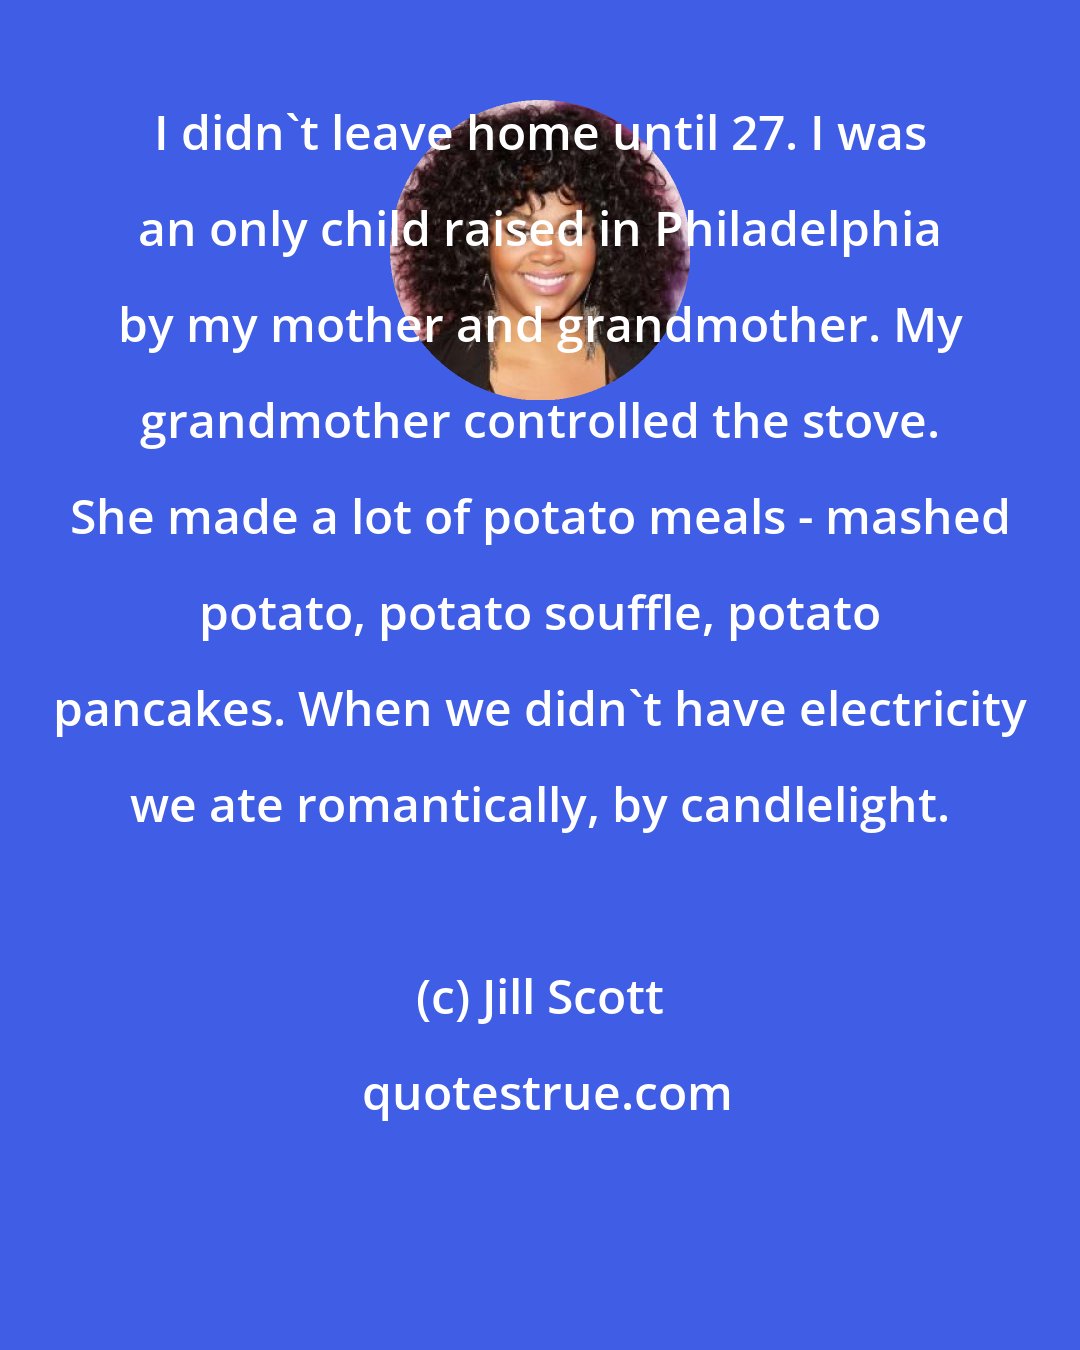 Jill Scott: I didn't leave home until 27. I was an only child raised in Philadelphia by my mother and grandmother. My grandmother controlled the stove. She made a lot of potato meals - mashed potato, potato souffle, potato pancakes. When we didn't have electricity we ate romantically, by candlelight.